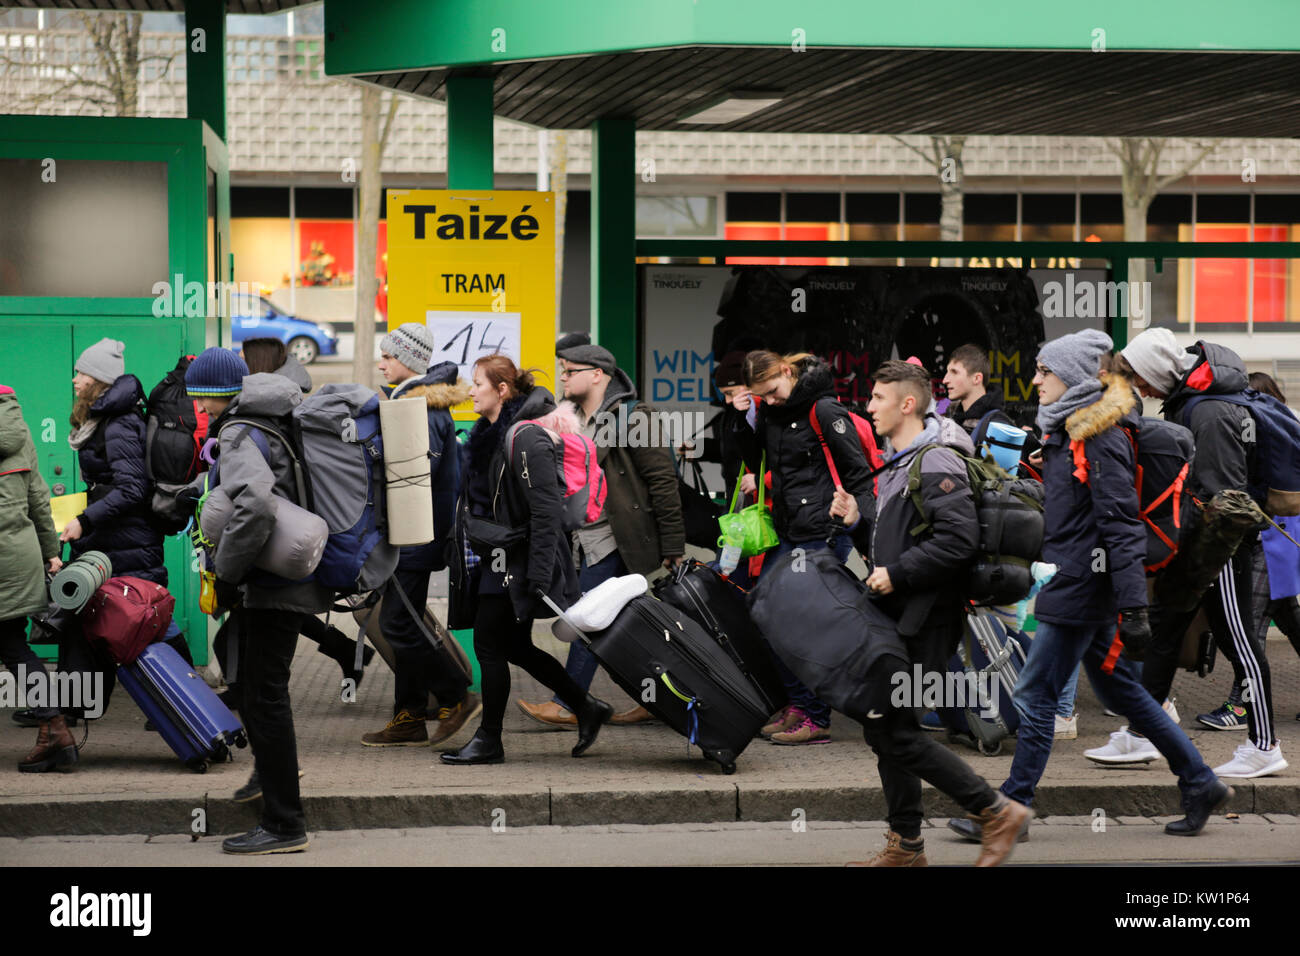 Basel, Switzerland. 28th Dec, 2017. Young pilgrims rush to the tram, to go to their host parishes. Several thousand young pilgrims from all over Europe and beyond arrived in Basel in Switzerland for the annual European Youth Meeting of the ecumenical Taize community. The meeting of prayers and meditation is held under the motto 'Pilgrimage of Trust on Earth' and is the 40th anniversary meeting. Credit: Michael Debets/Alamy Live News Stock Photo